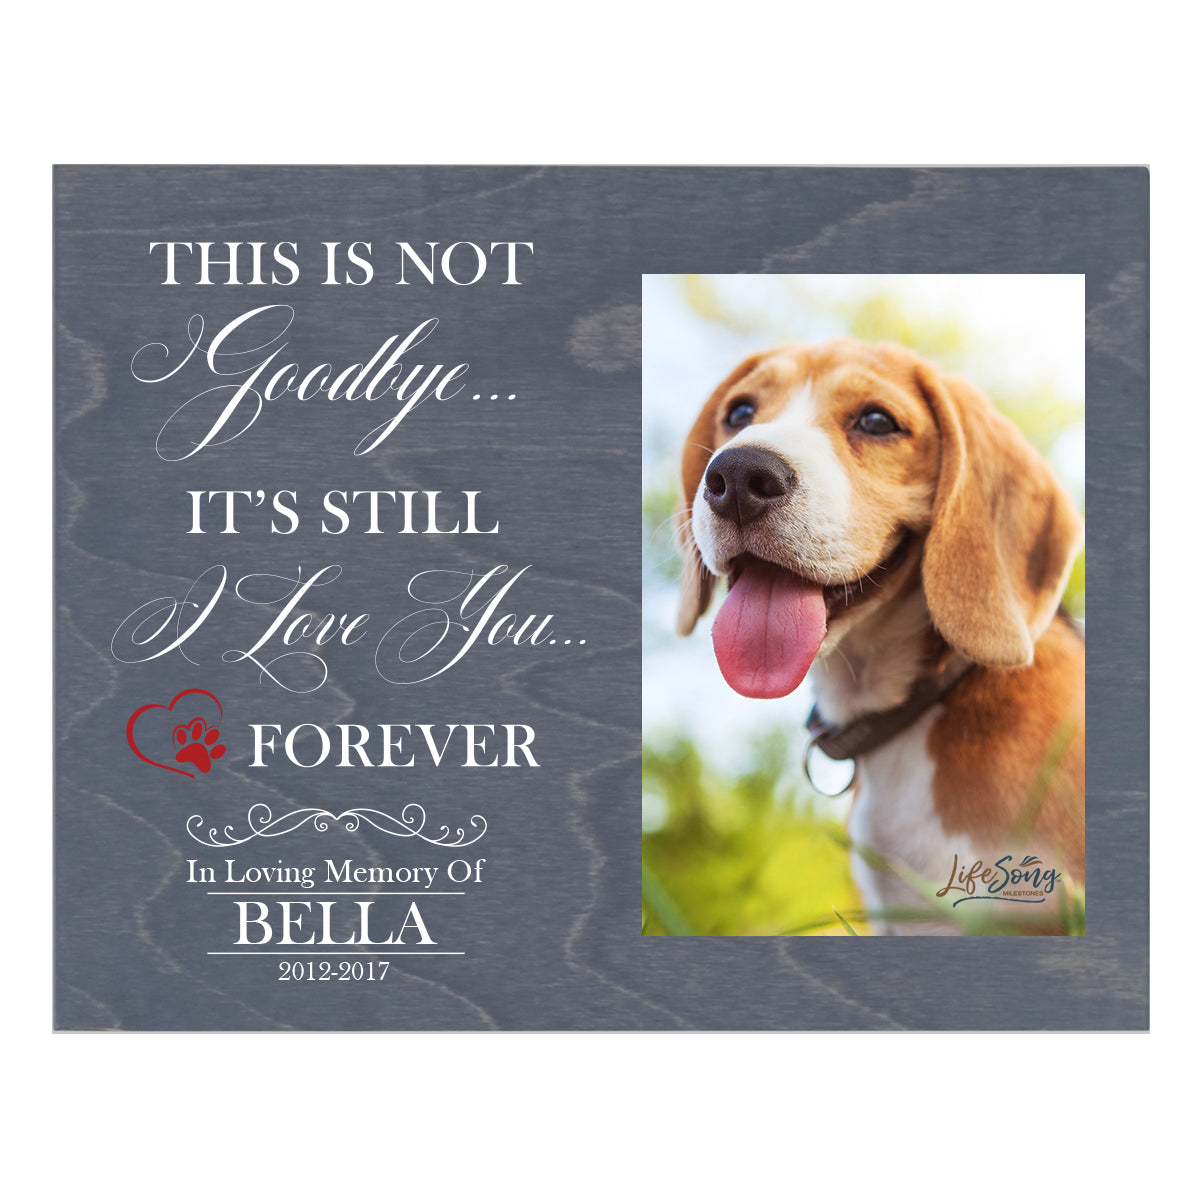 Pet Memorial Photo Wall Plaque Décor - This Is Not Goodbye